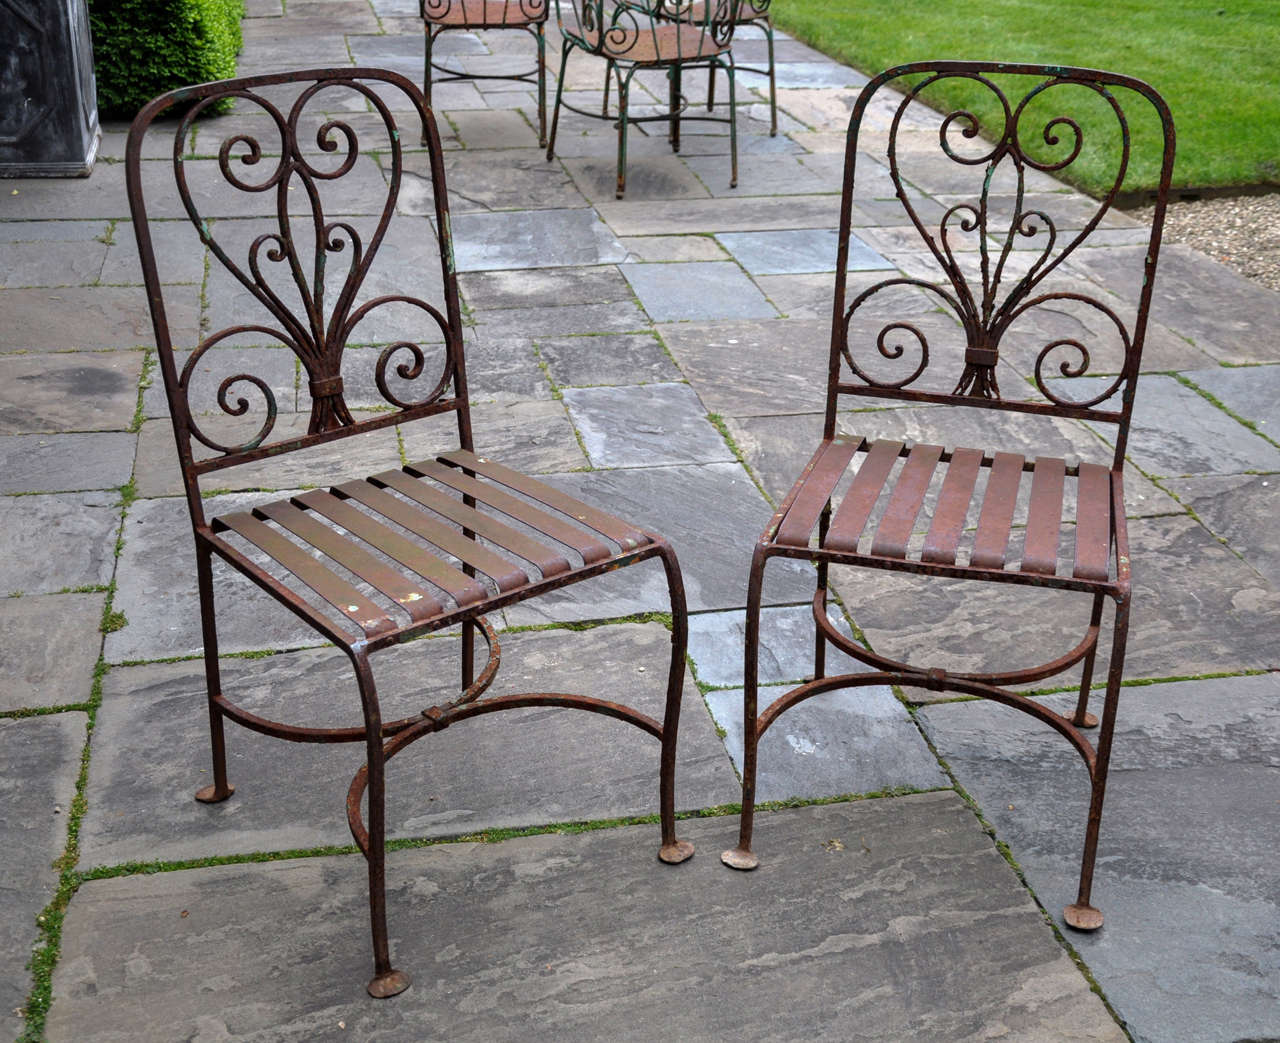 Two Companionable Iron Garden Chairs to our 